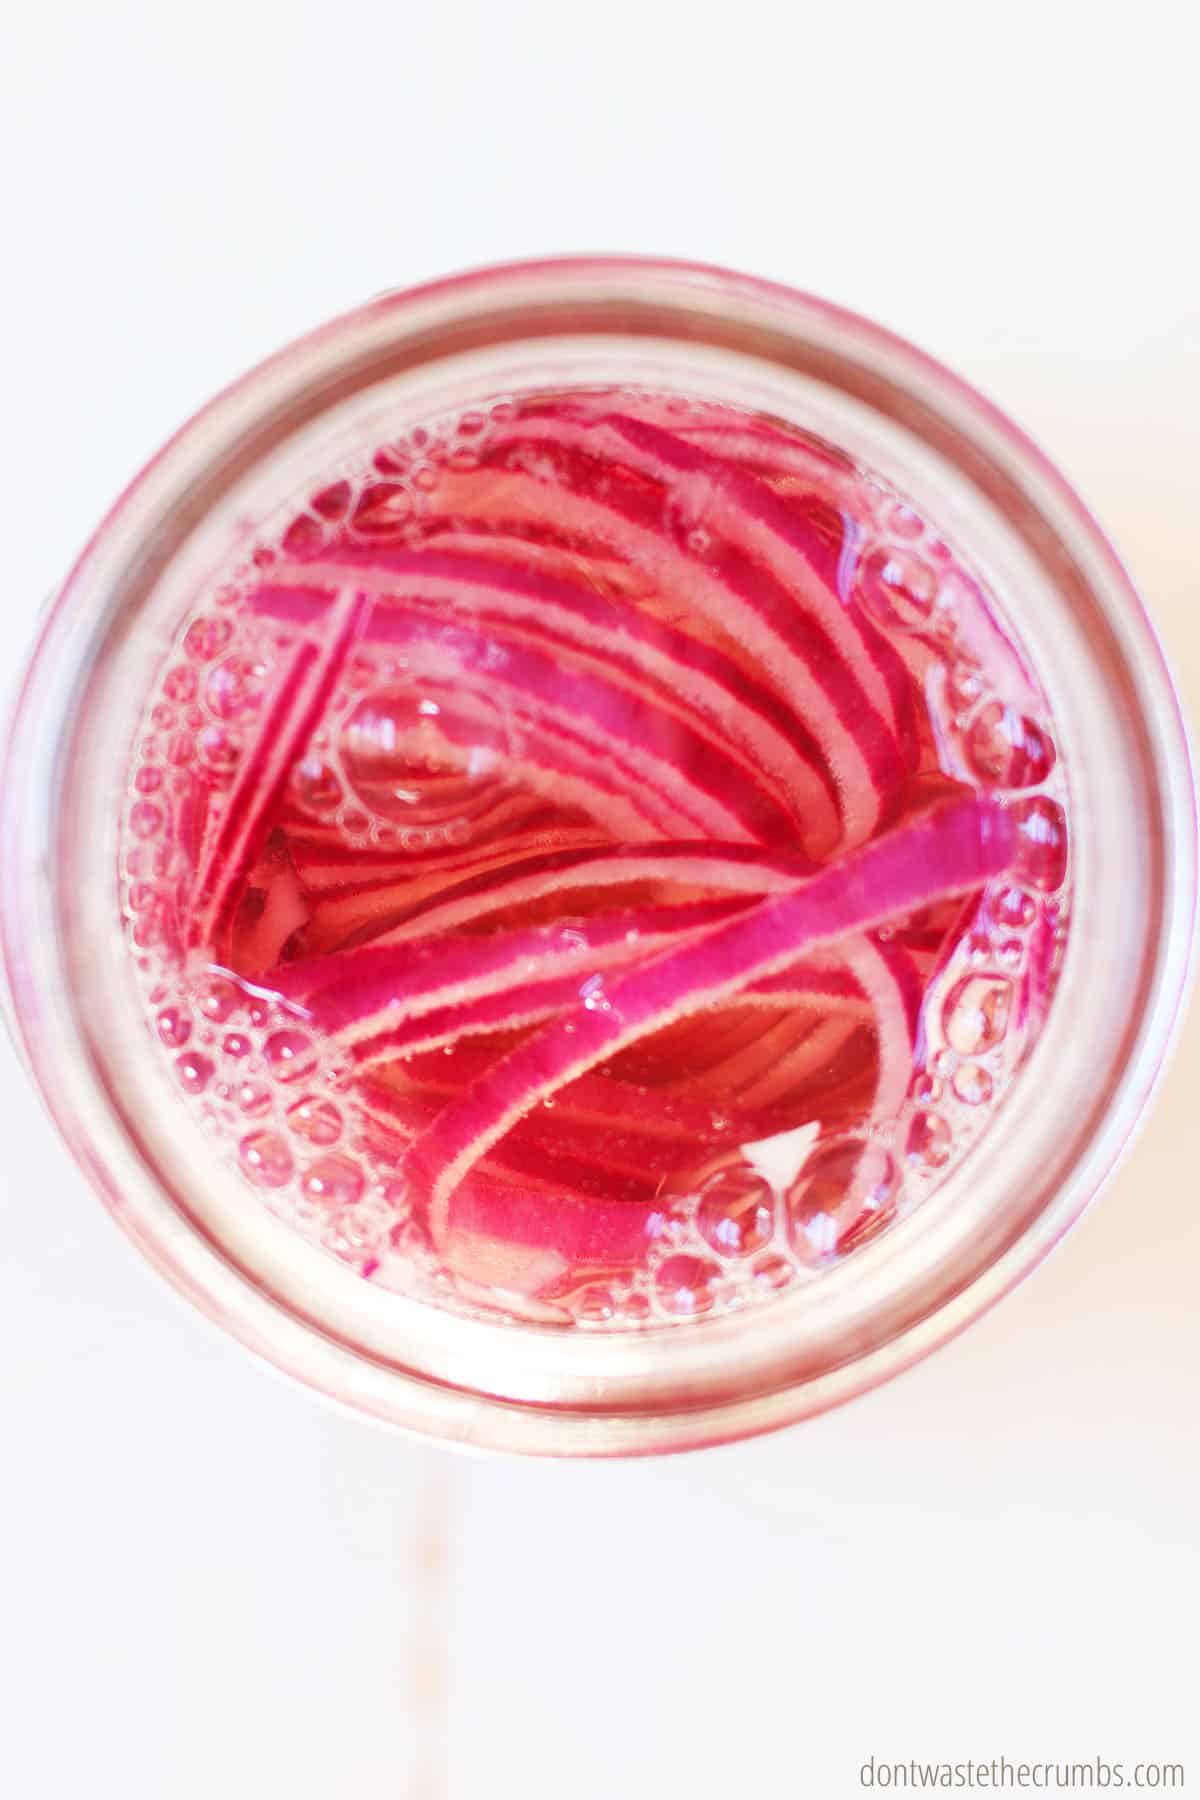 The vinegar has been poured into the glass pint size mason jar with red onions. This is part of the process in making this easy and delicious pickled red onion recipe.